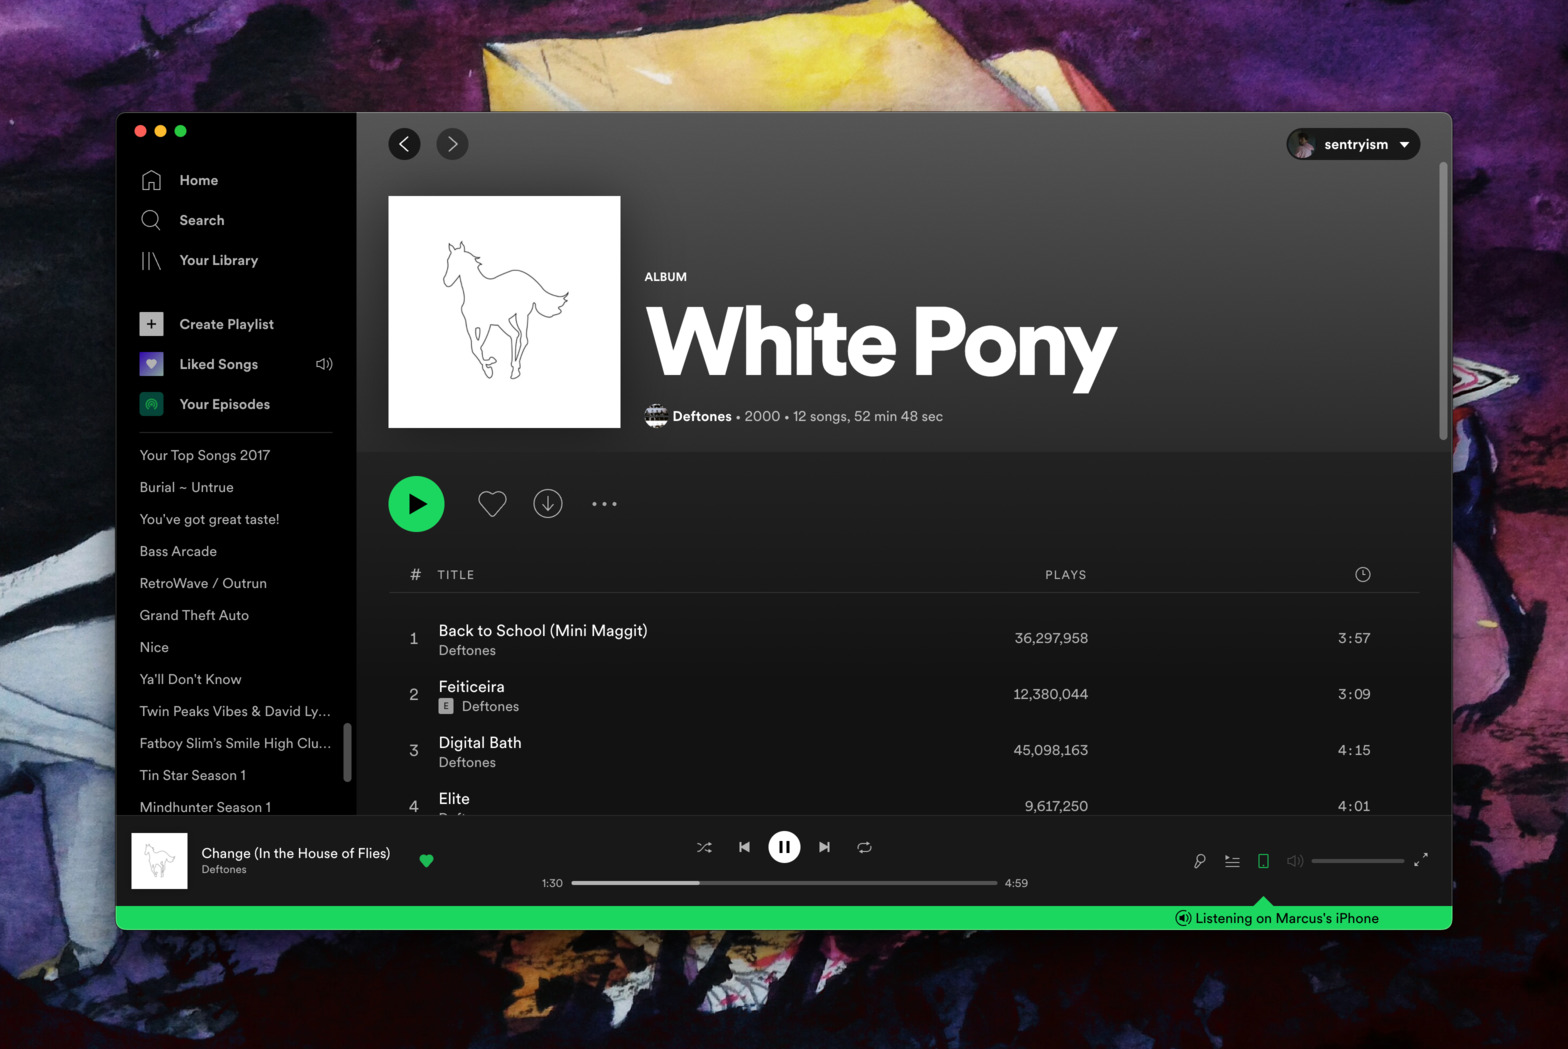 A screenshot of the Spotify desktop client open to the album White Pony by the band Deftones. The track "Change (In the House of Flies)" is currently playing. At the bottom of the screen is a green banner that says "Listening on Marcus's iPhone". This indicates that the user is able to remotely control the session from their desktop.